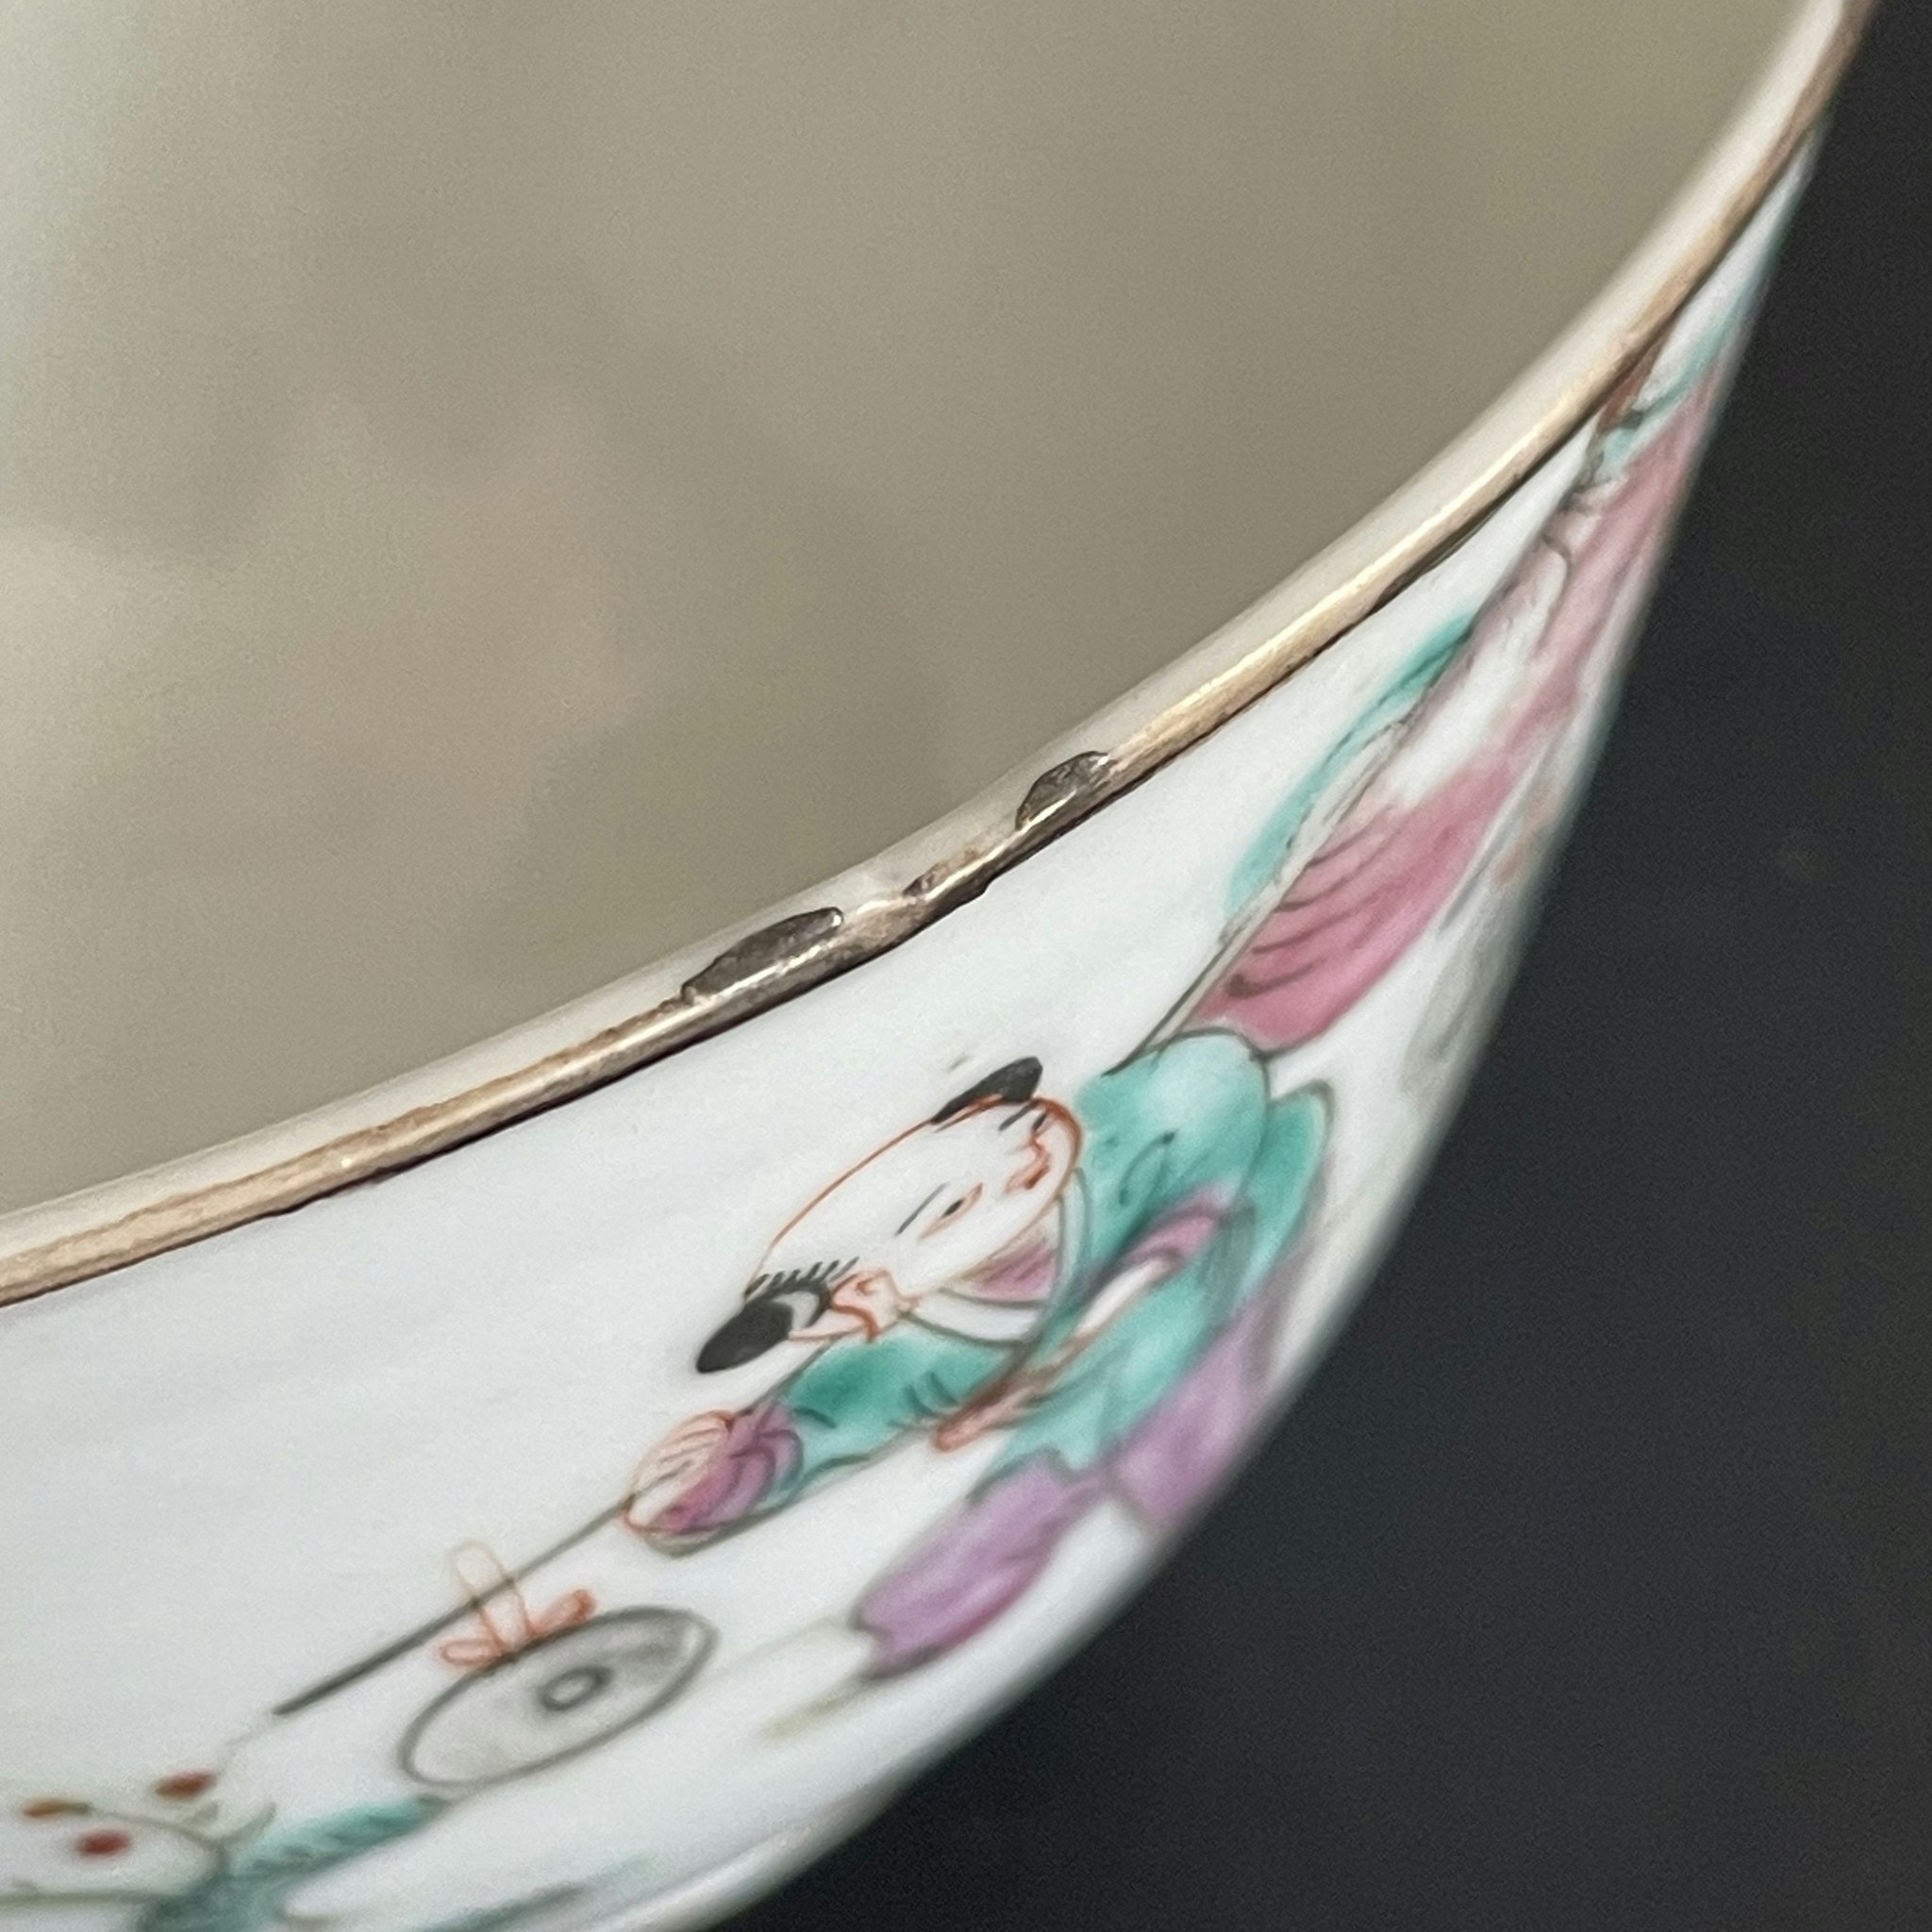 Chinese antique teacup decorated in Famille Rose, Tongzhi, Late Qing #1673